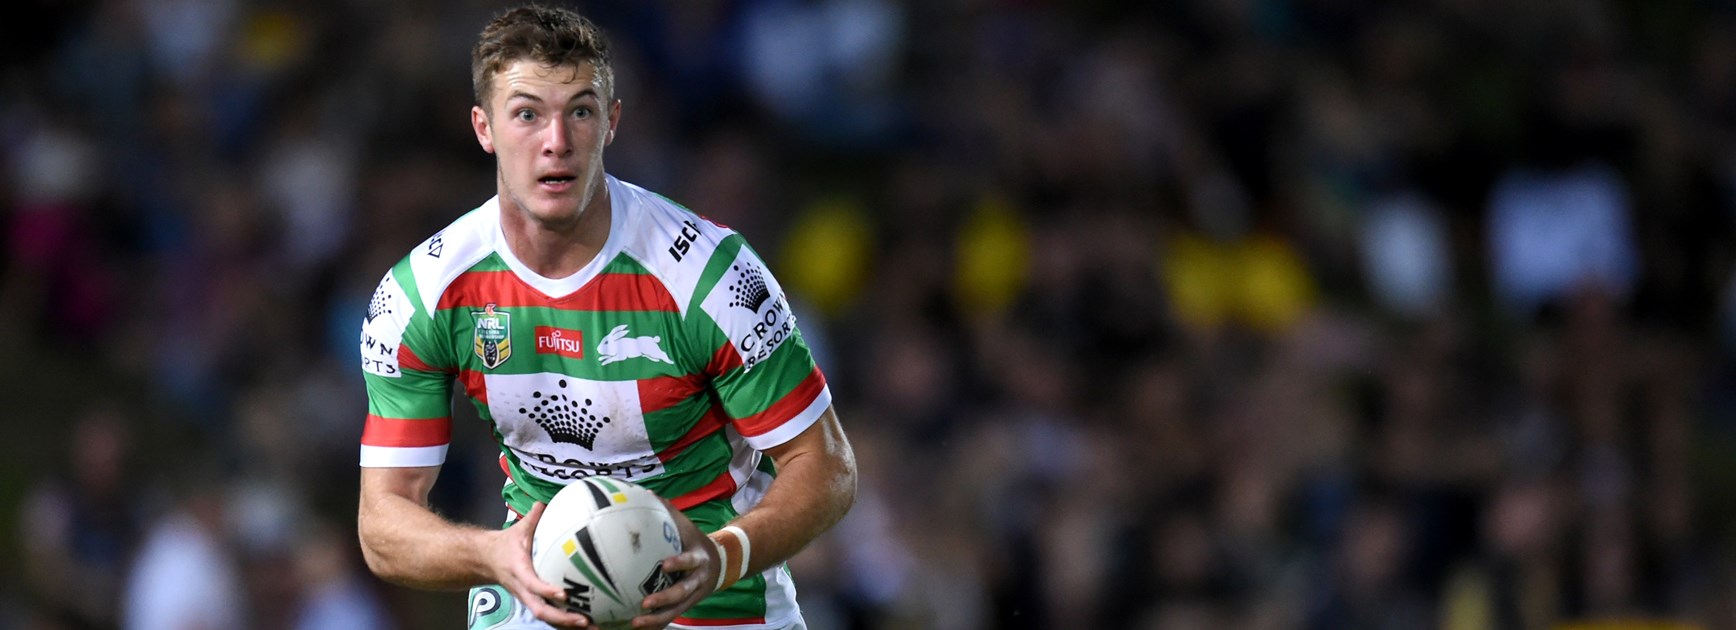 Young stars on show in Albury for Rabbitohs trial